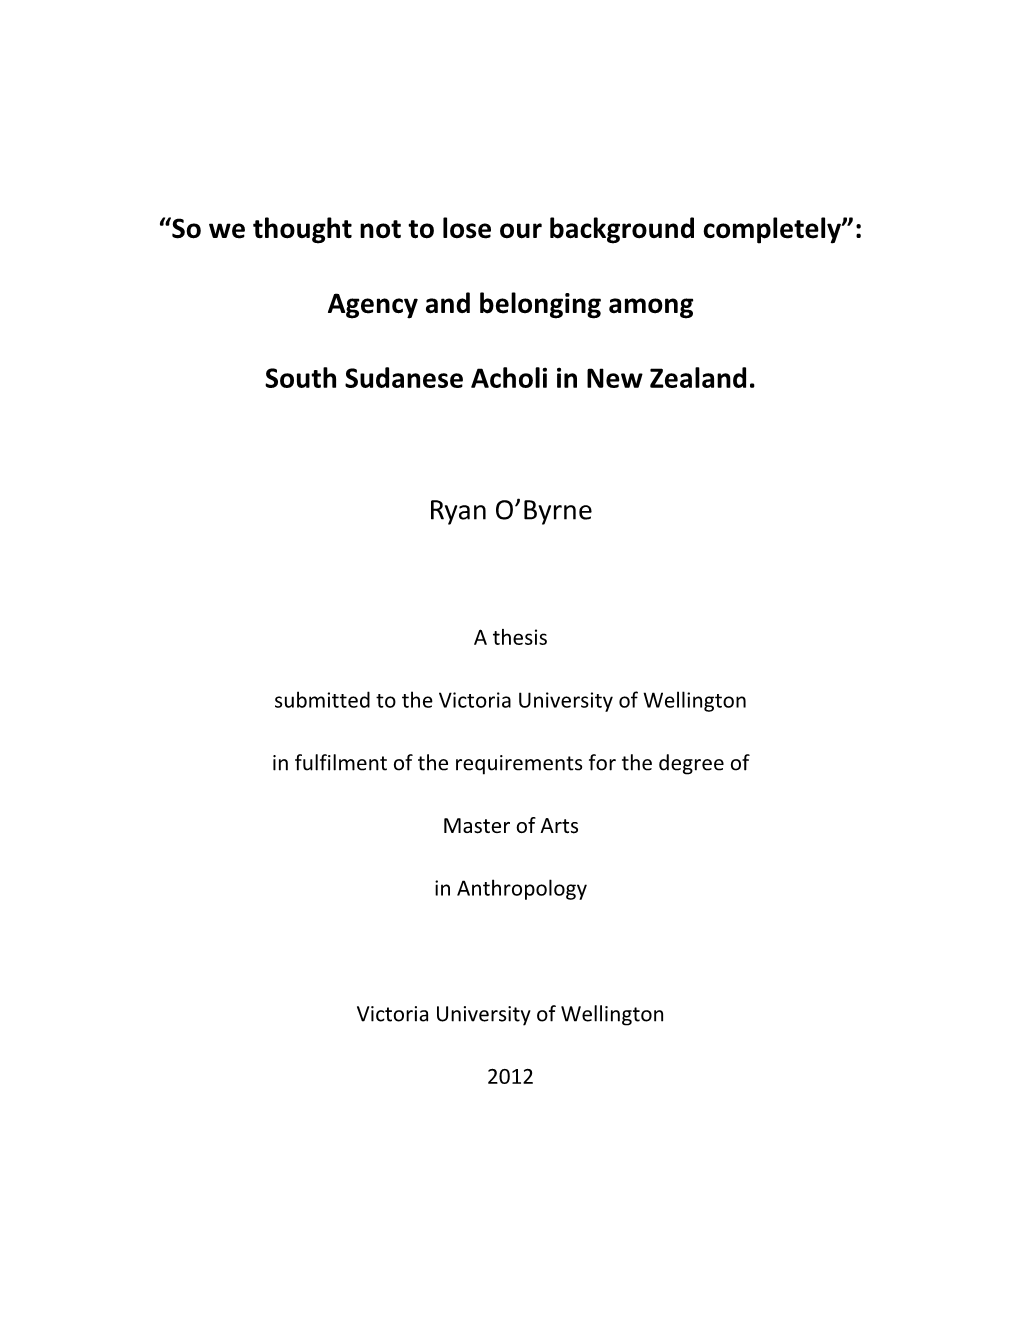 Agency and Belonging Among South Sudanese Acholi in New Zealand